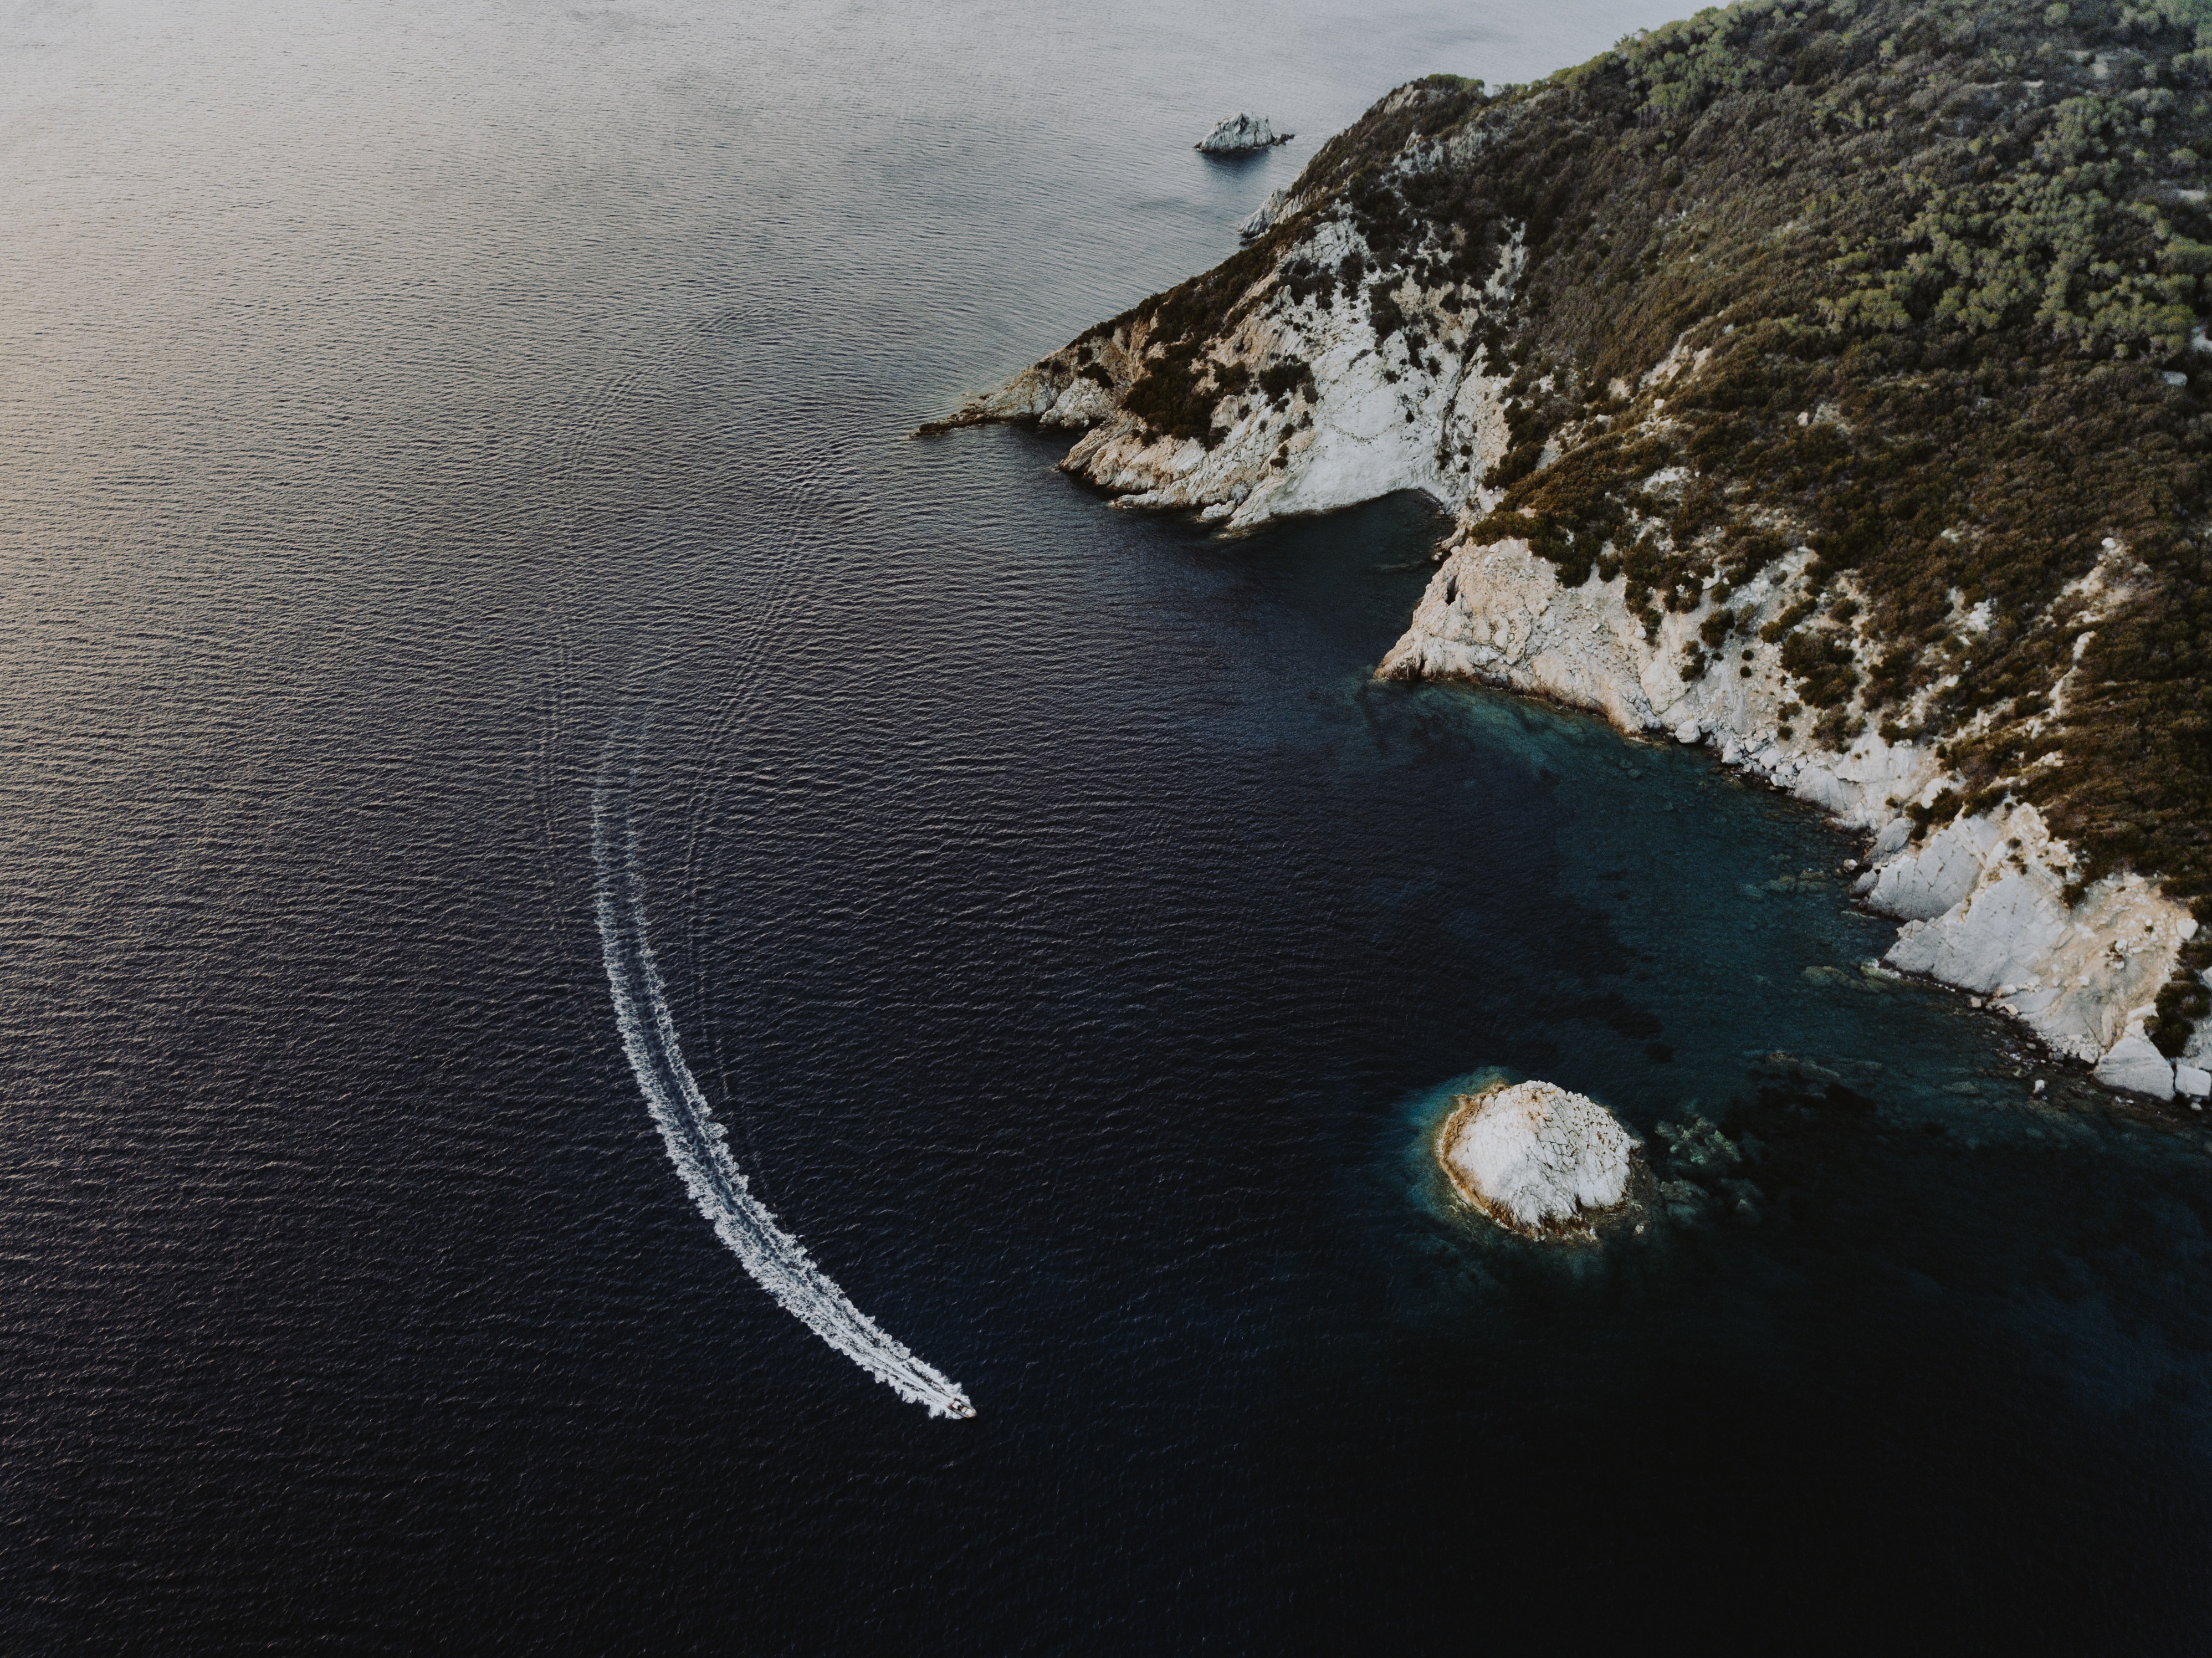 Drone shot of a boat in Elba Italy